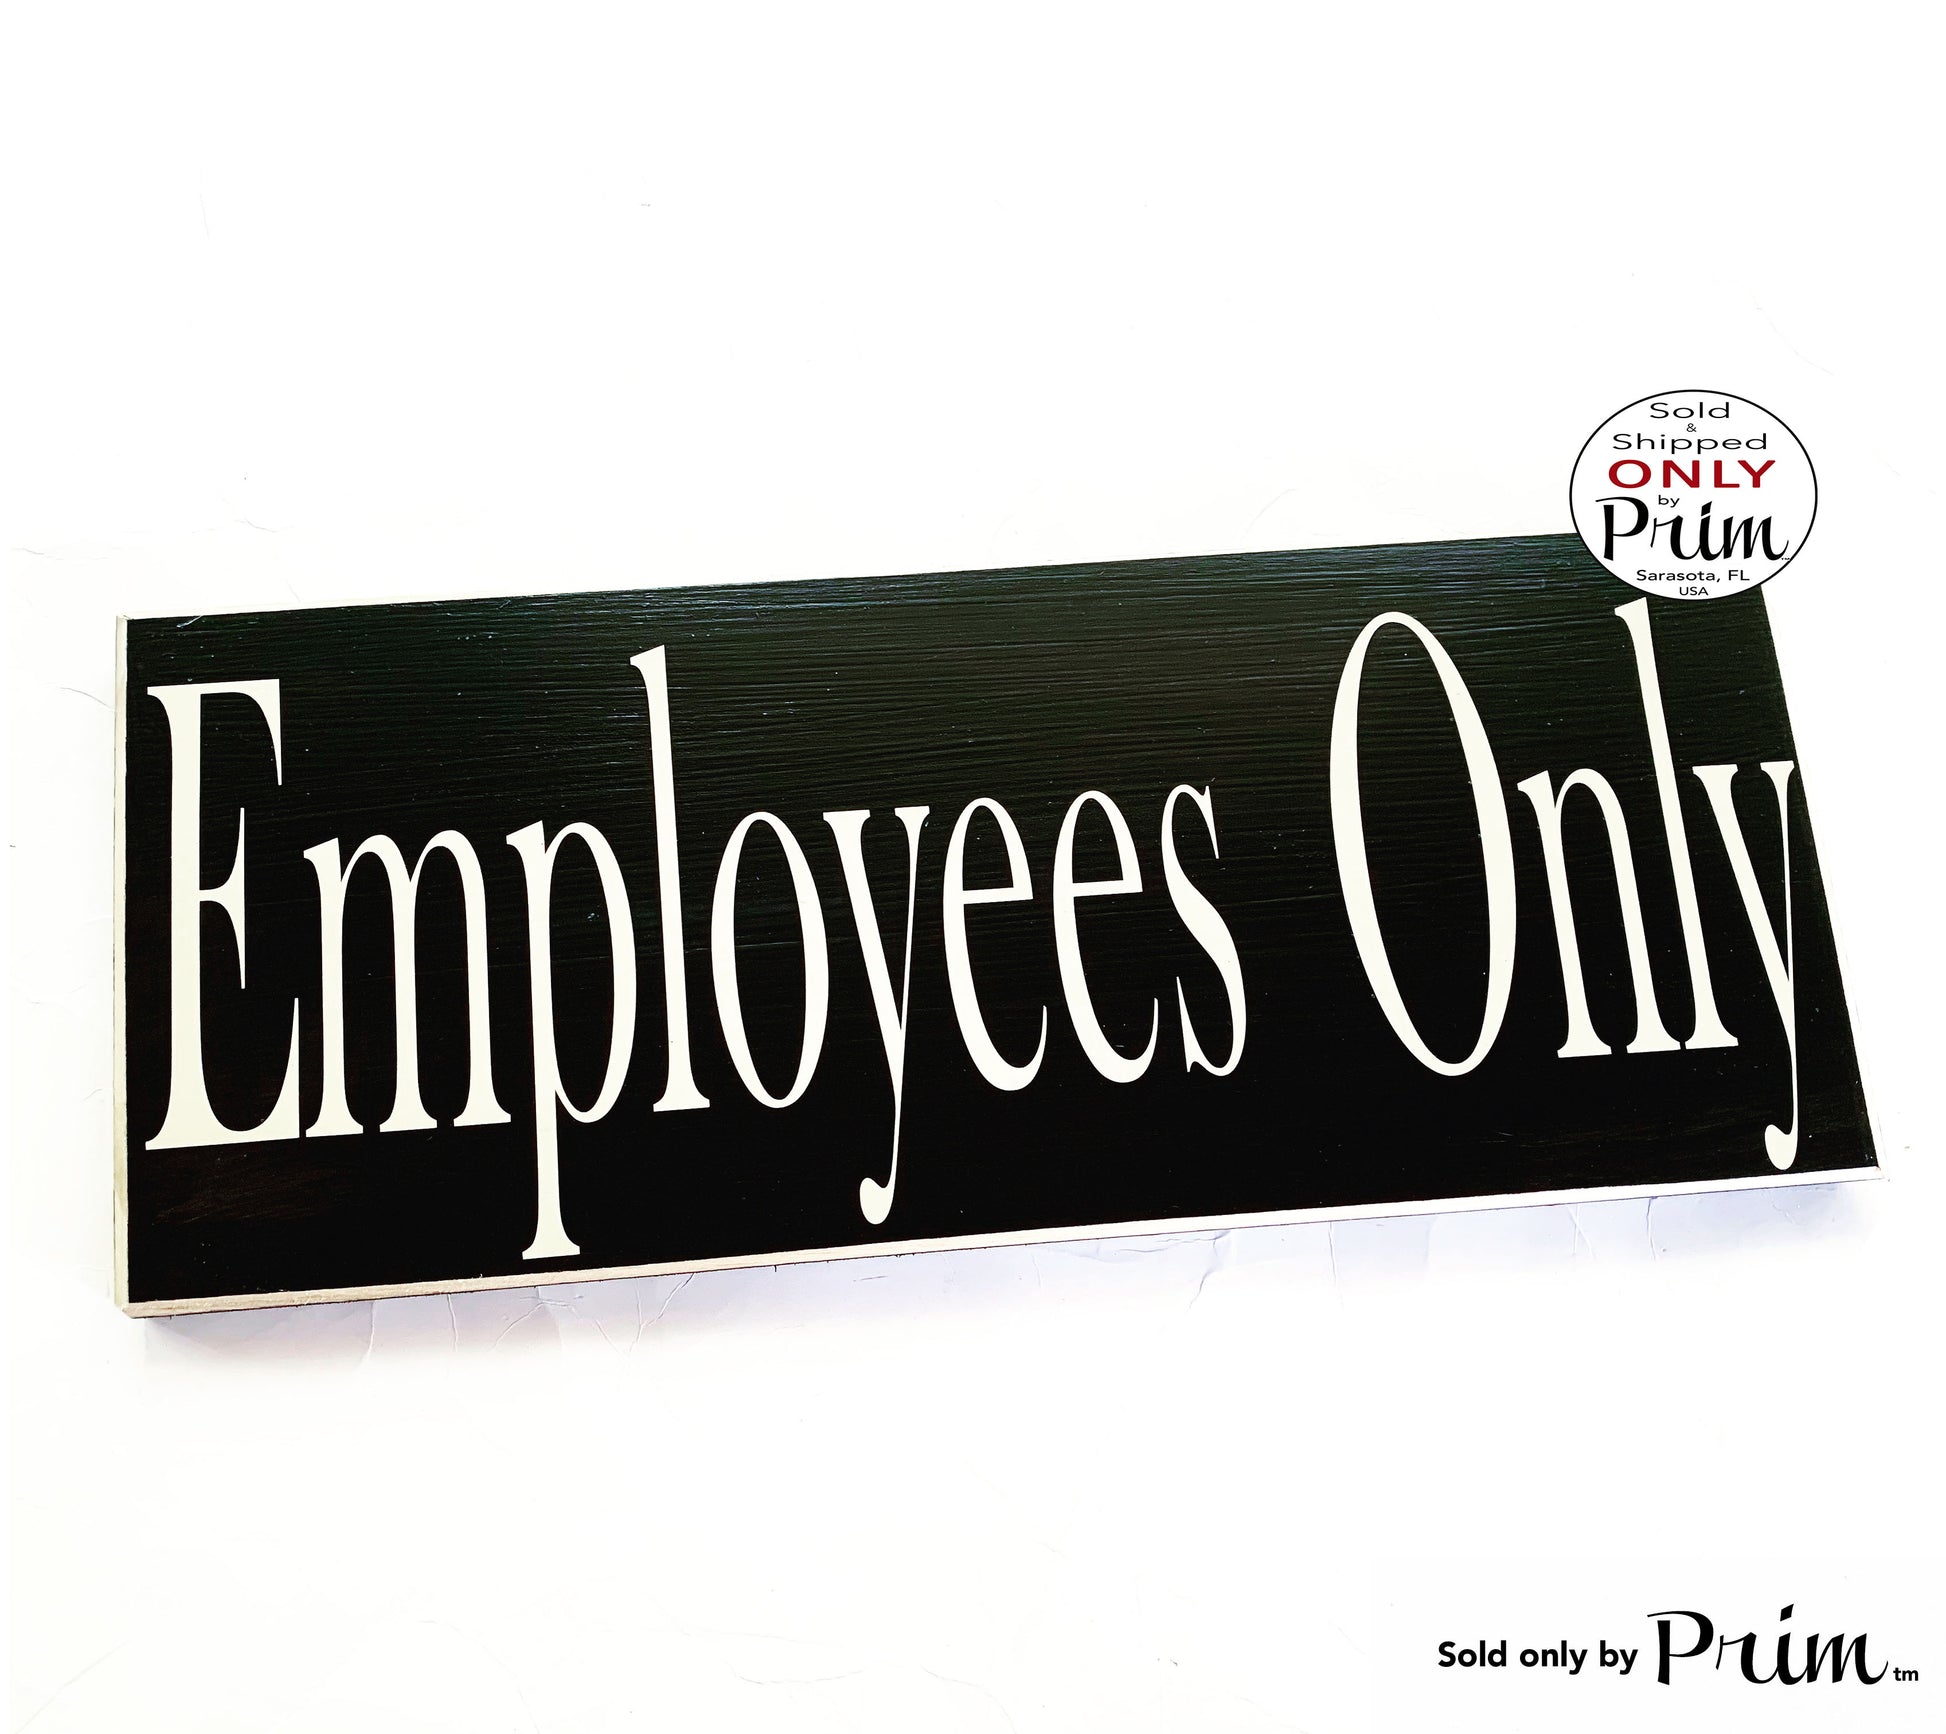 Designs by Prim 10x4 Employees Only Custom Wood Sign | Salon Shop Business Office Staff Only Do Not Enter Private No Entry Wall Decor Hanger Door Plaque